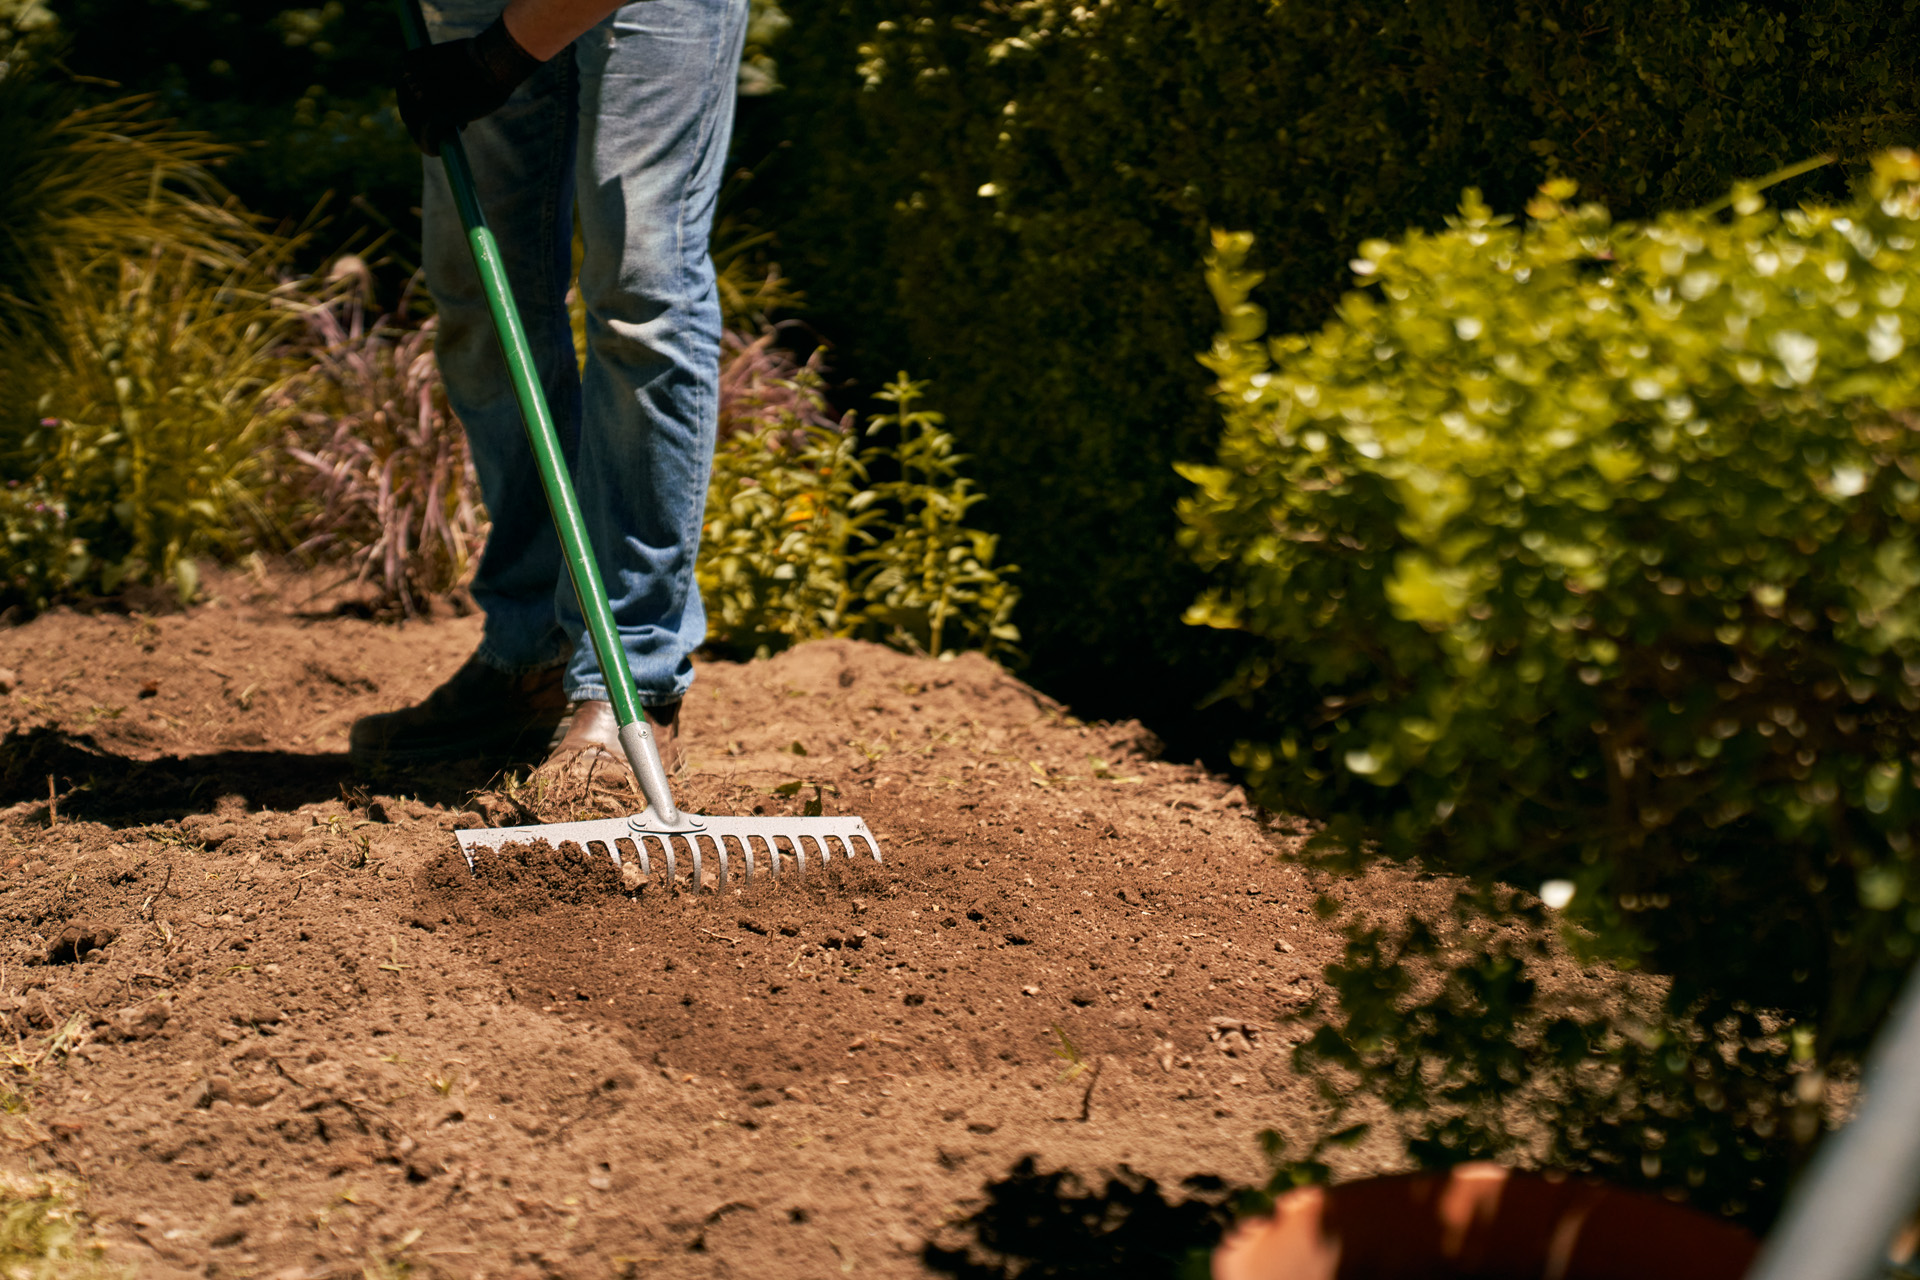 A person using a rake to level soil in a garden bed